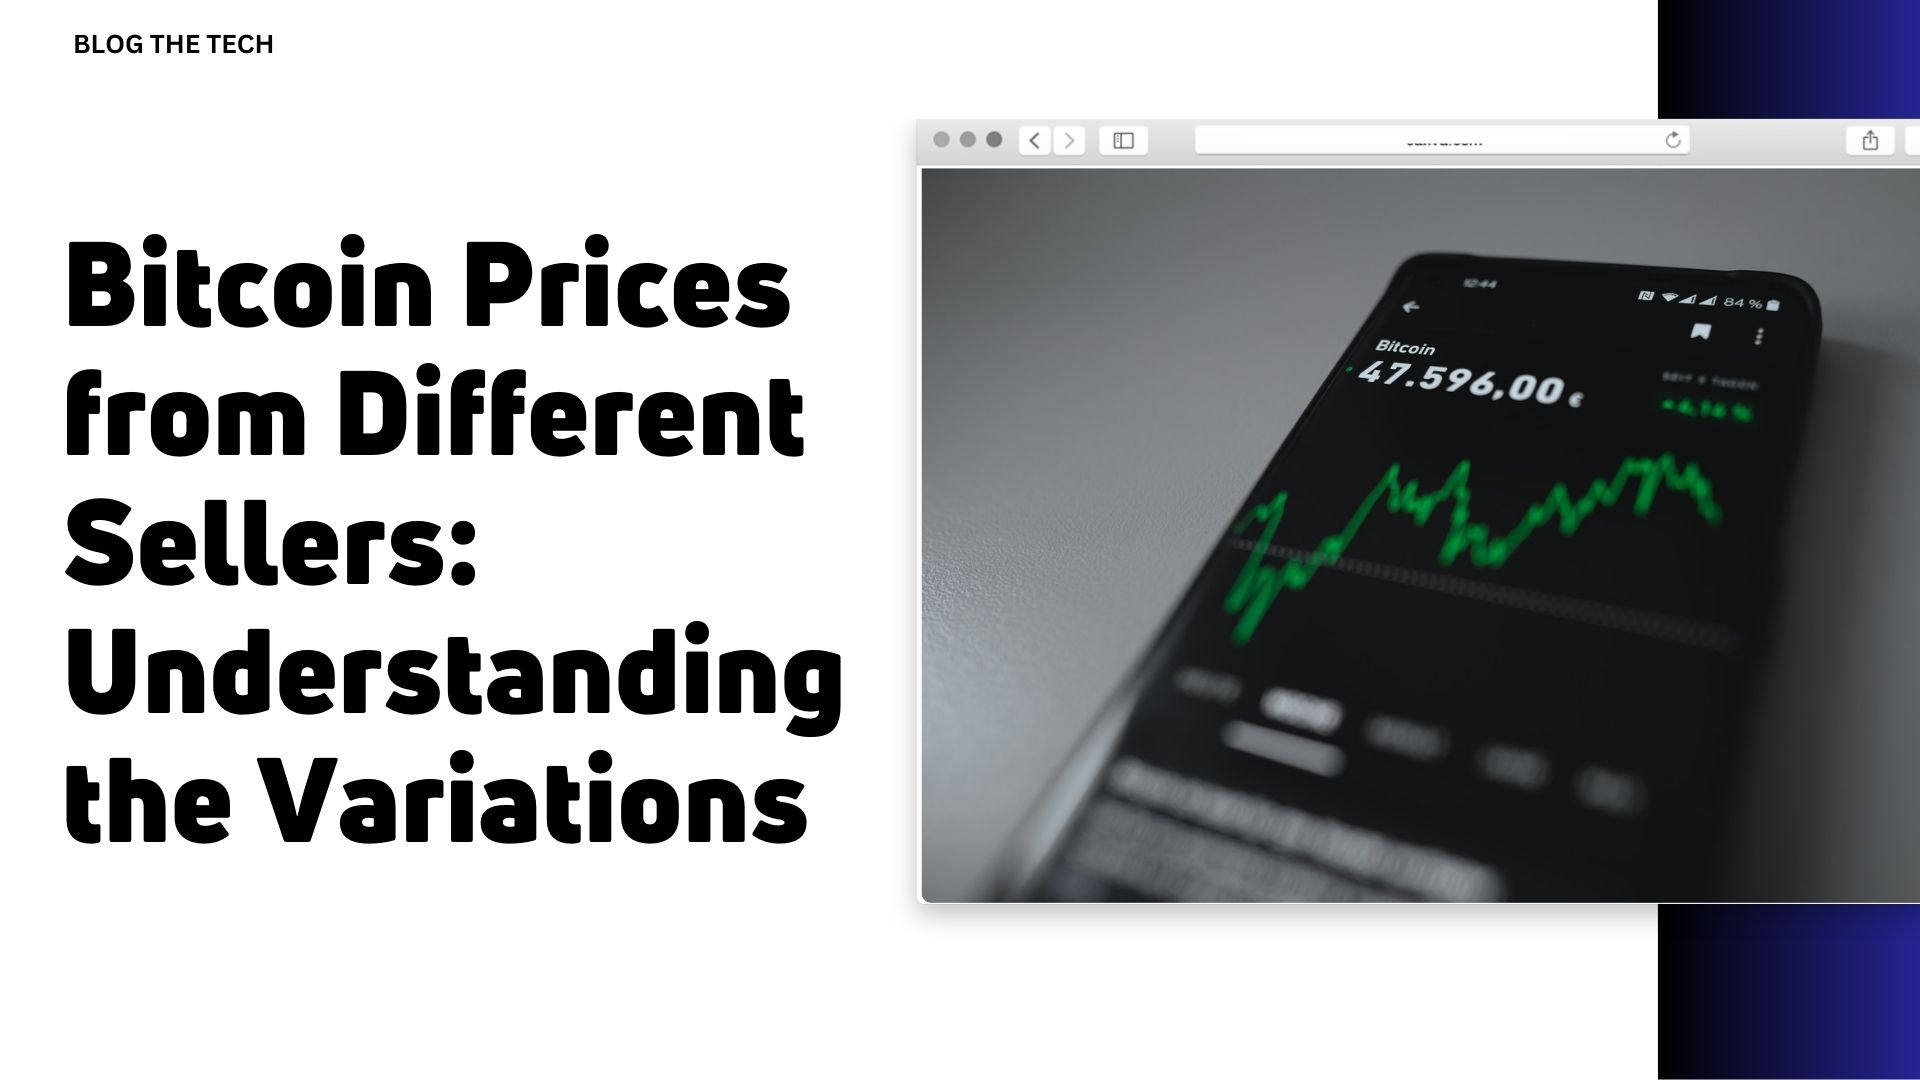 Bitcoin Prices from Different Sellers: Understanding the Variations